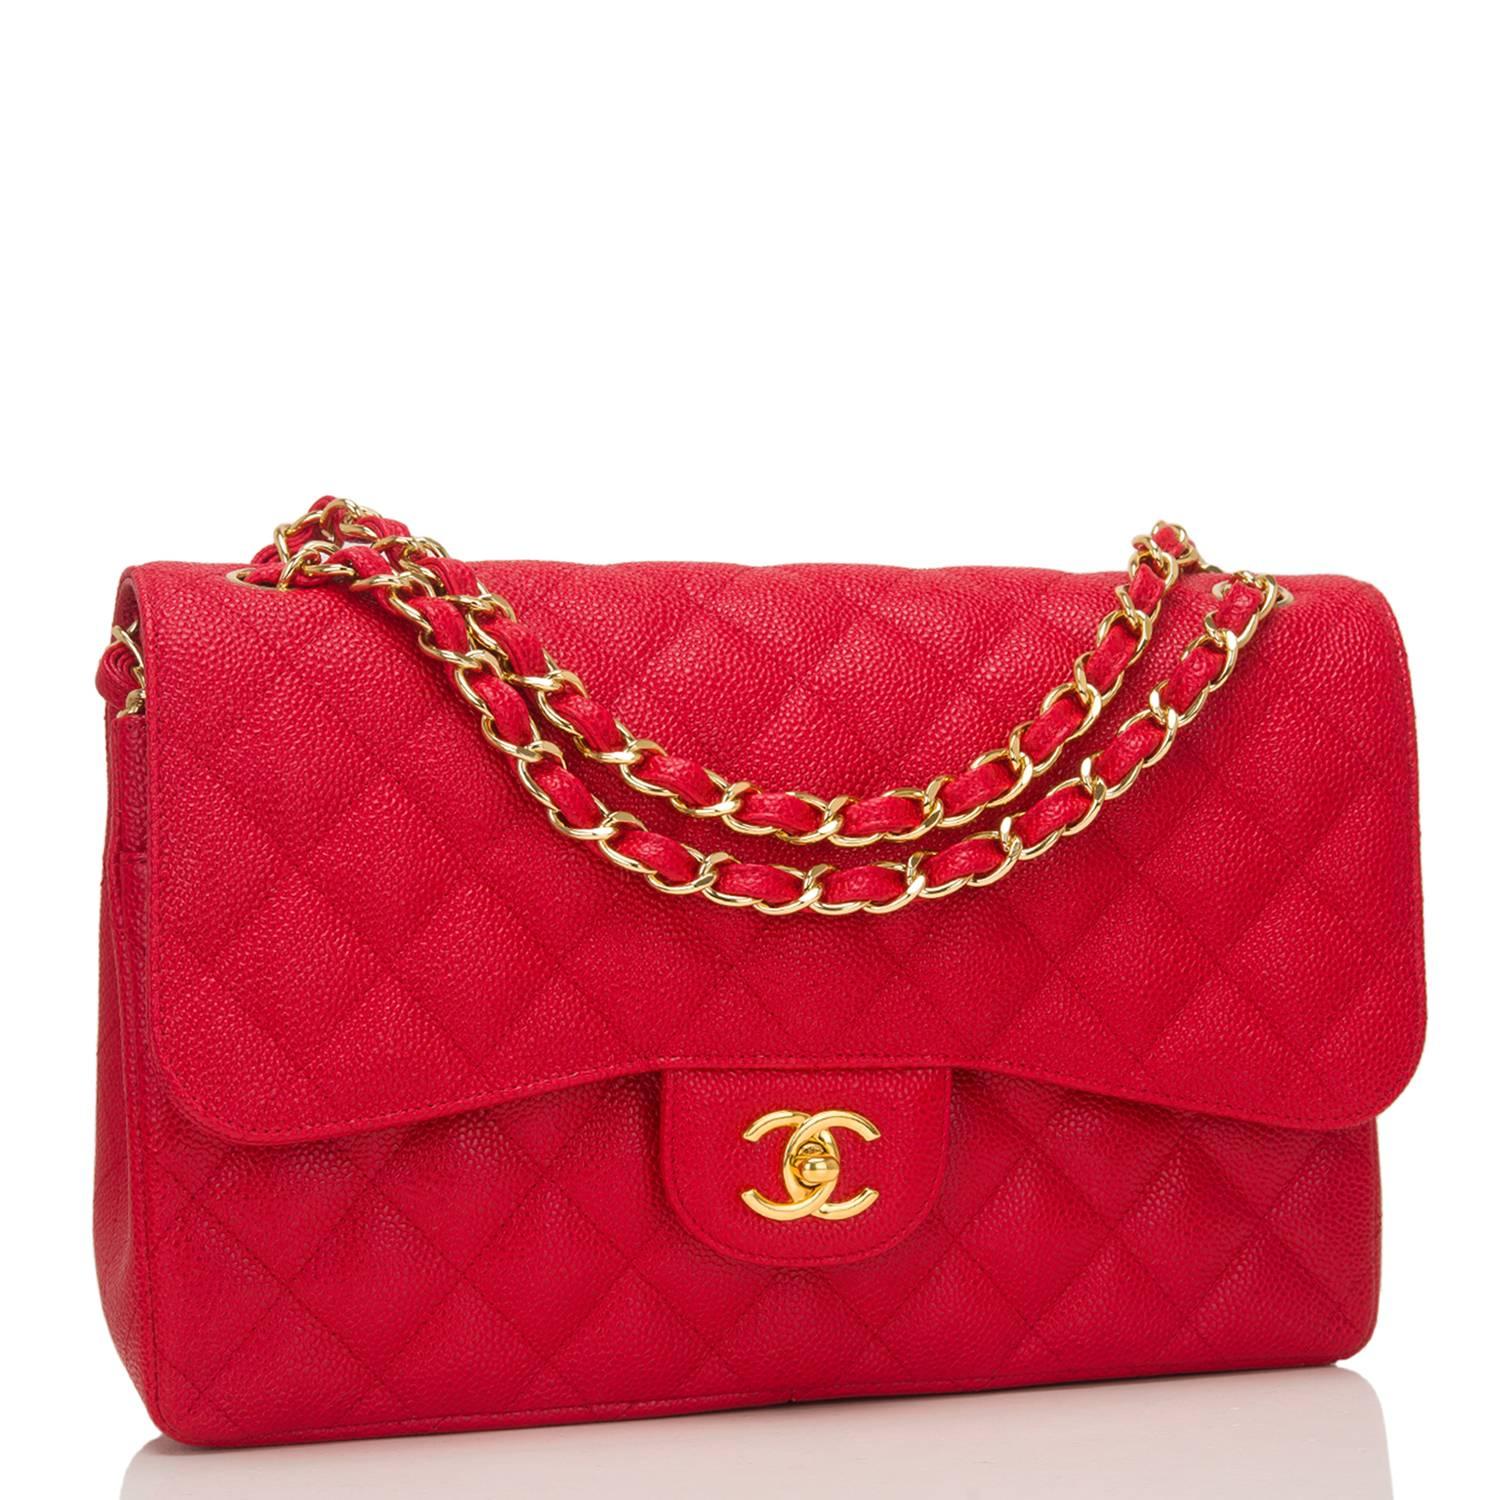 Chanel Jumbo Classic double flap bag of red caviar leather with gold tone hardware.

This bag features a front flap with signature CC turnlock closure, a half moon back pocket, and an adjustable interwoven gold tone chain link and dark red leather